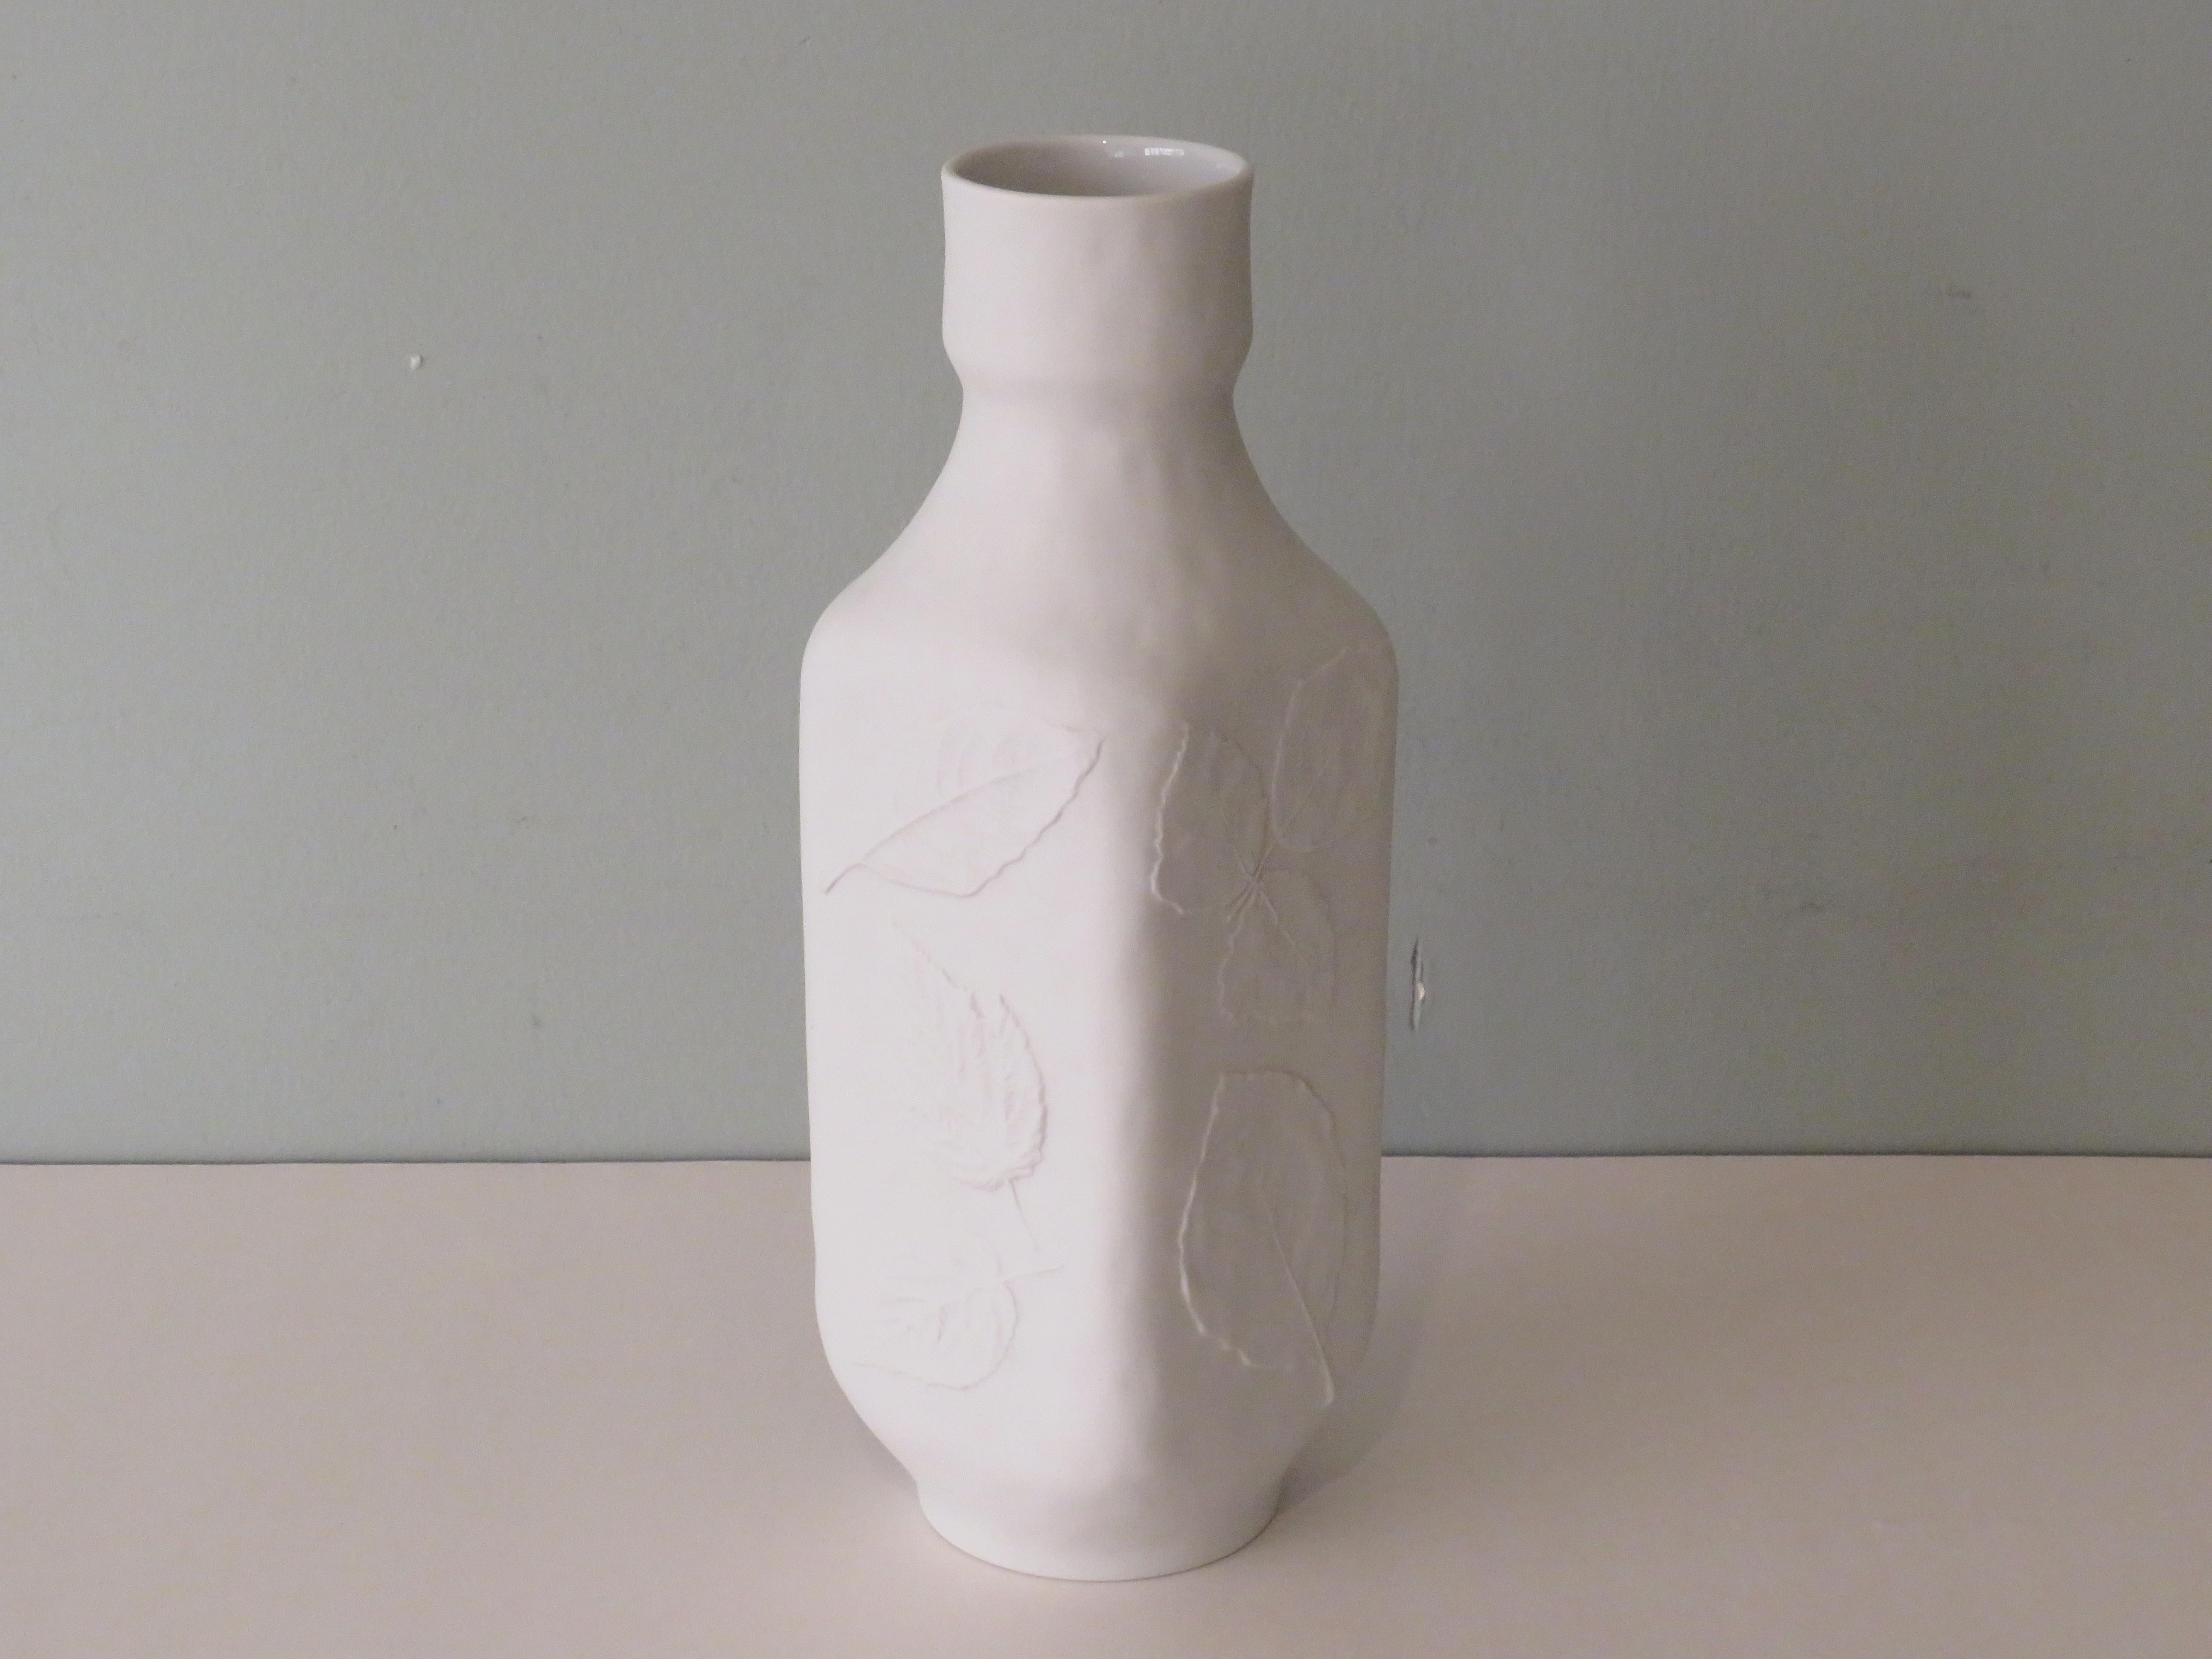 White Biscuit Vase with Floral Embossed Motif, Hutschenreuther, Germany, 1970s For Sale 2